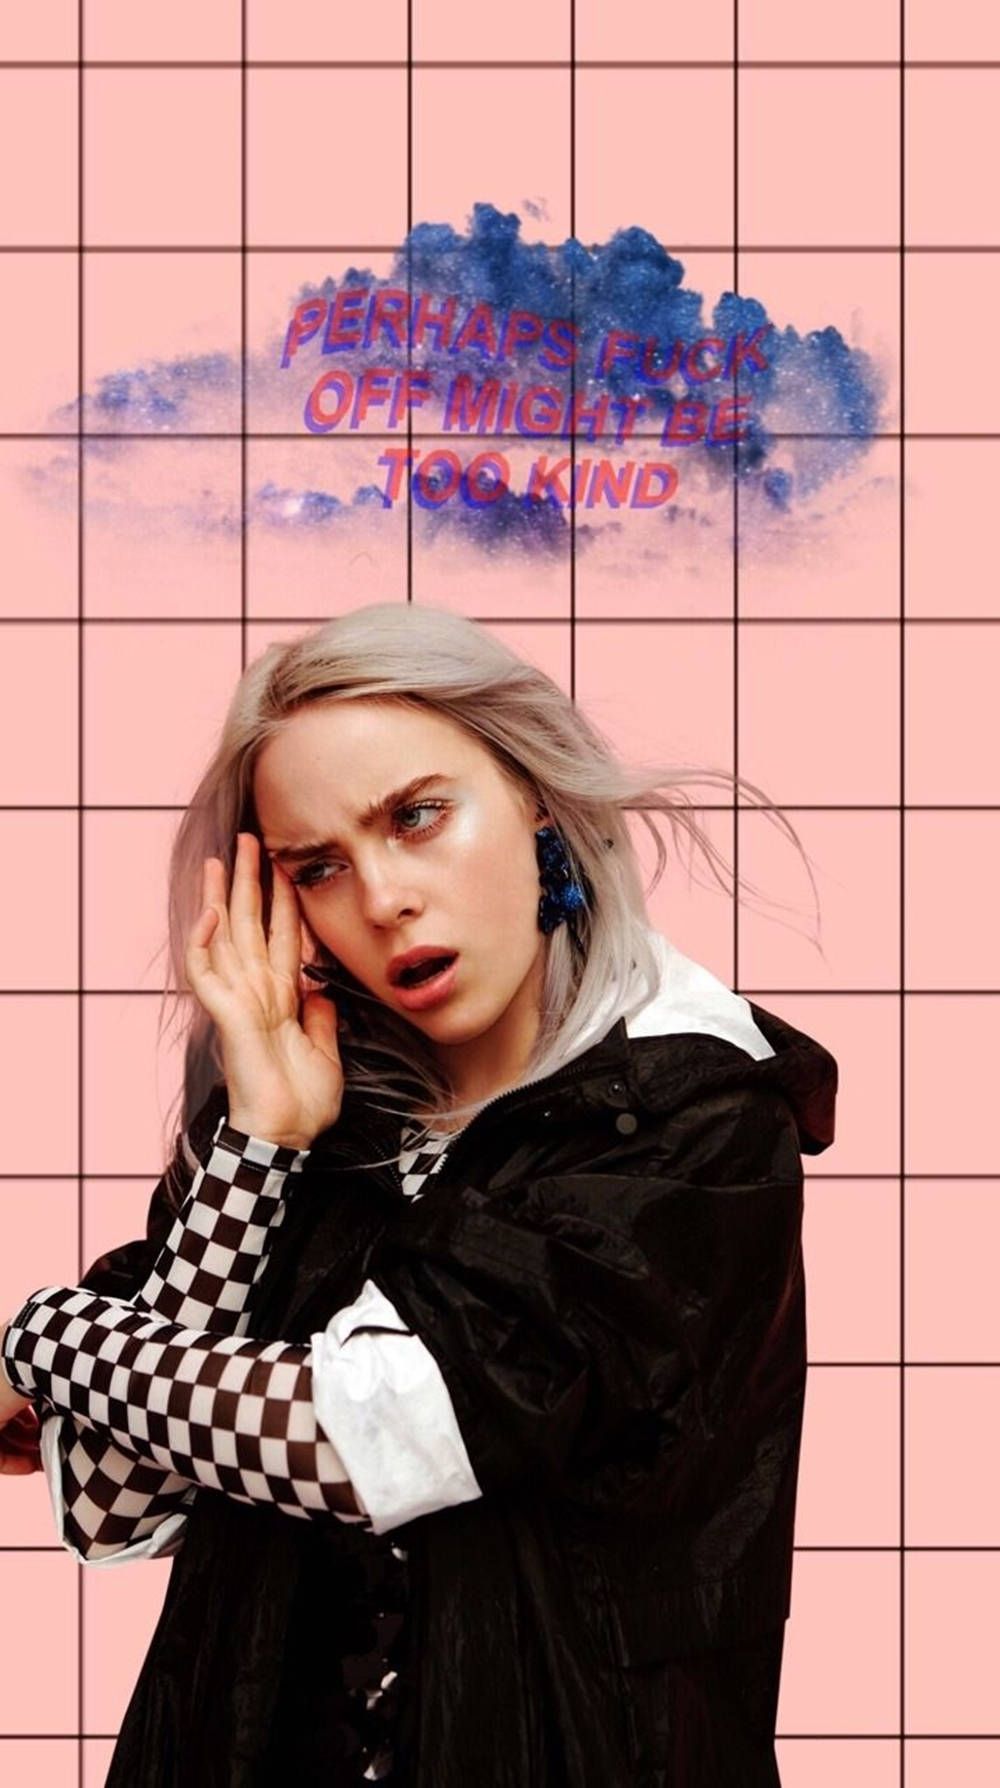 Billie Eilish iPhone Wallpaper with high-resolution 1080x1920 pixel. You can use this wallpaper for your iPhone 5, 6, 7, 8, X, XS, XR backgrounds, Mobile Screensaver, or iPad Lock Screen - Billie Eilish